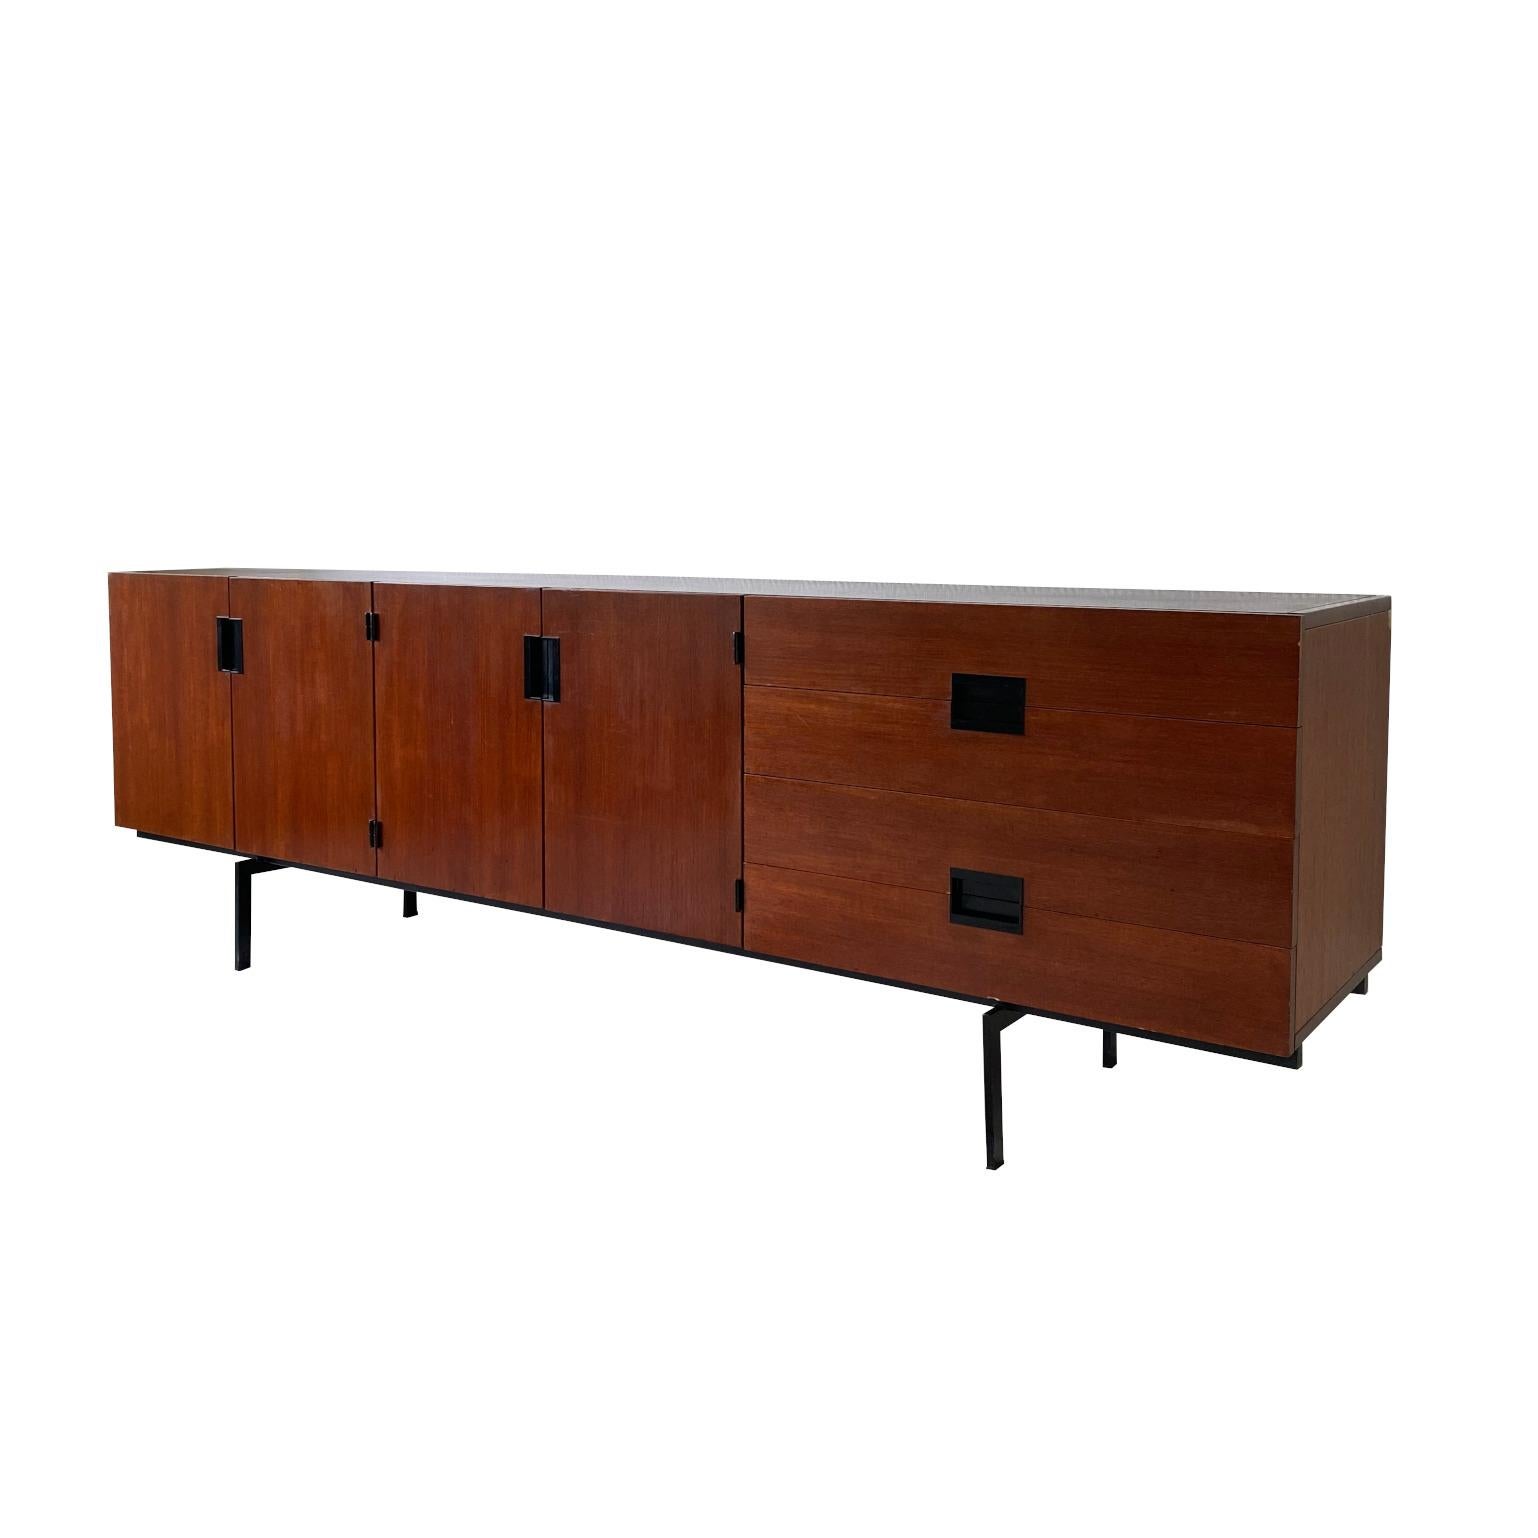 Mindblowing and timeless design, this large sideboard/Credenza by Cees Braakman for Pastoe, The Netherlands. This piece was made from teakwood veneer and features four drawers and two cabinets with a shelf each inside. This piece remains in very